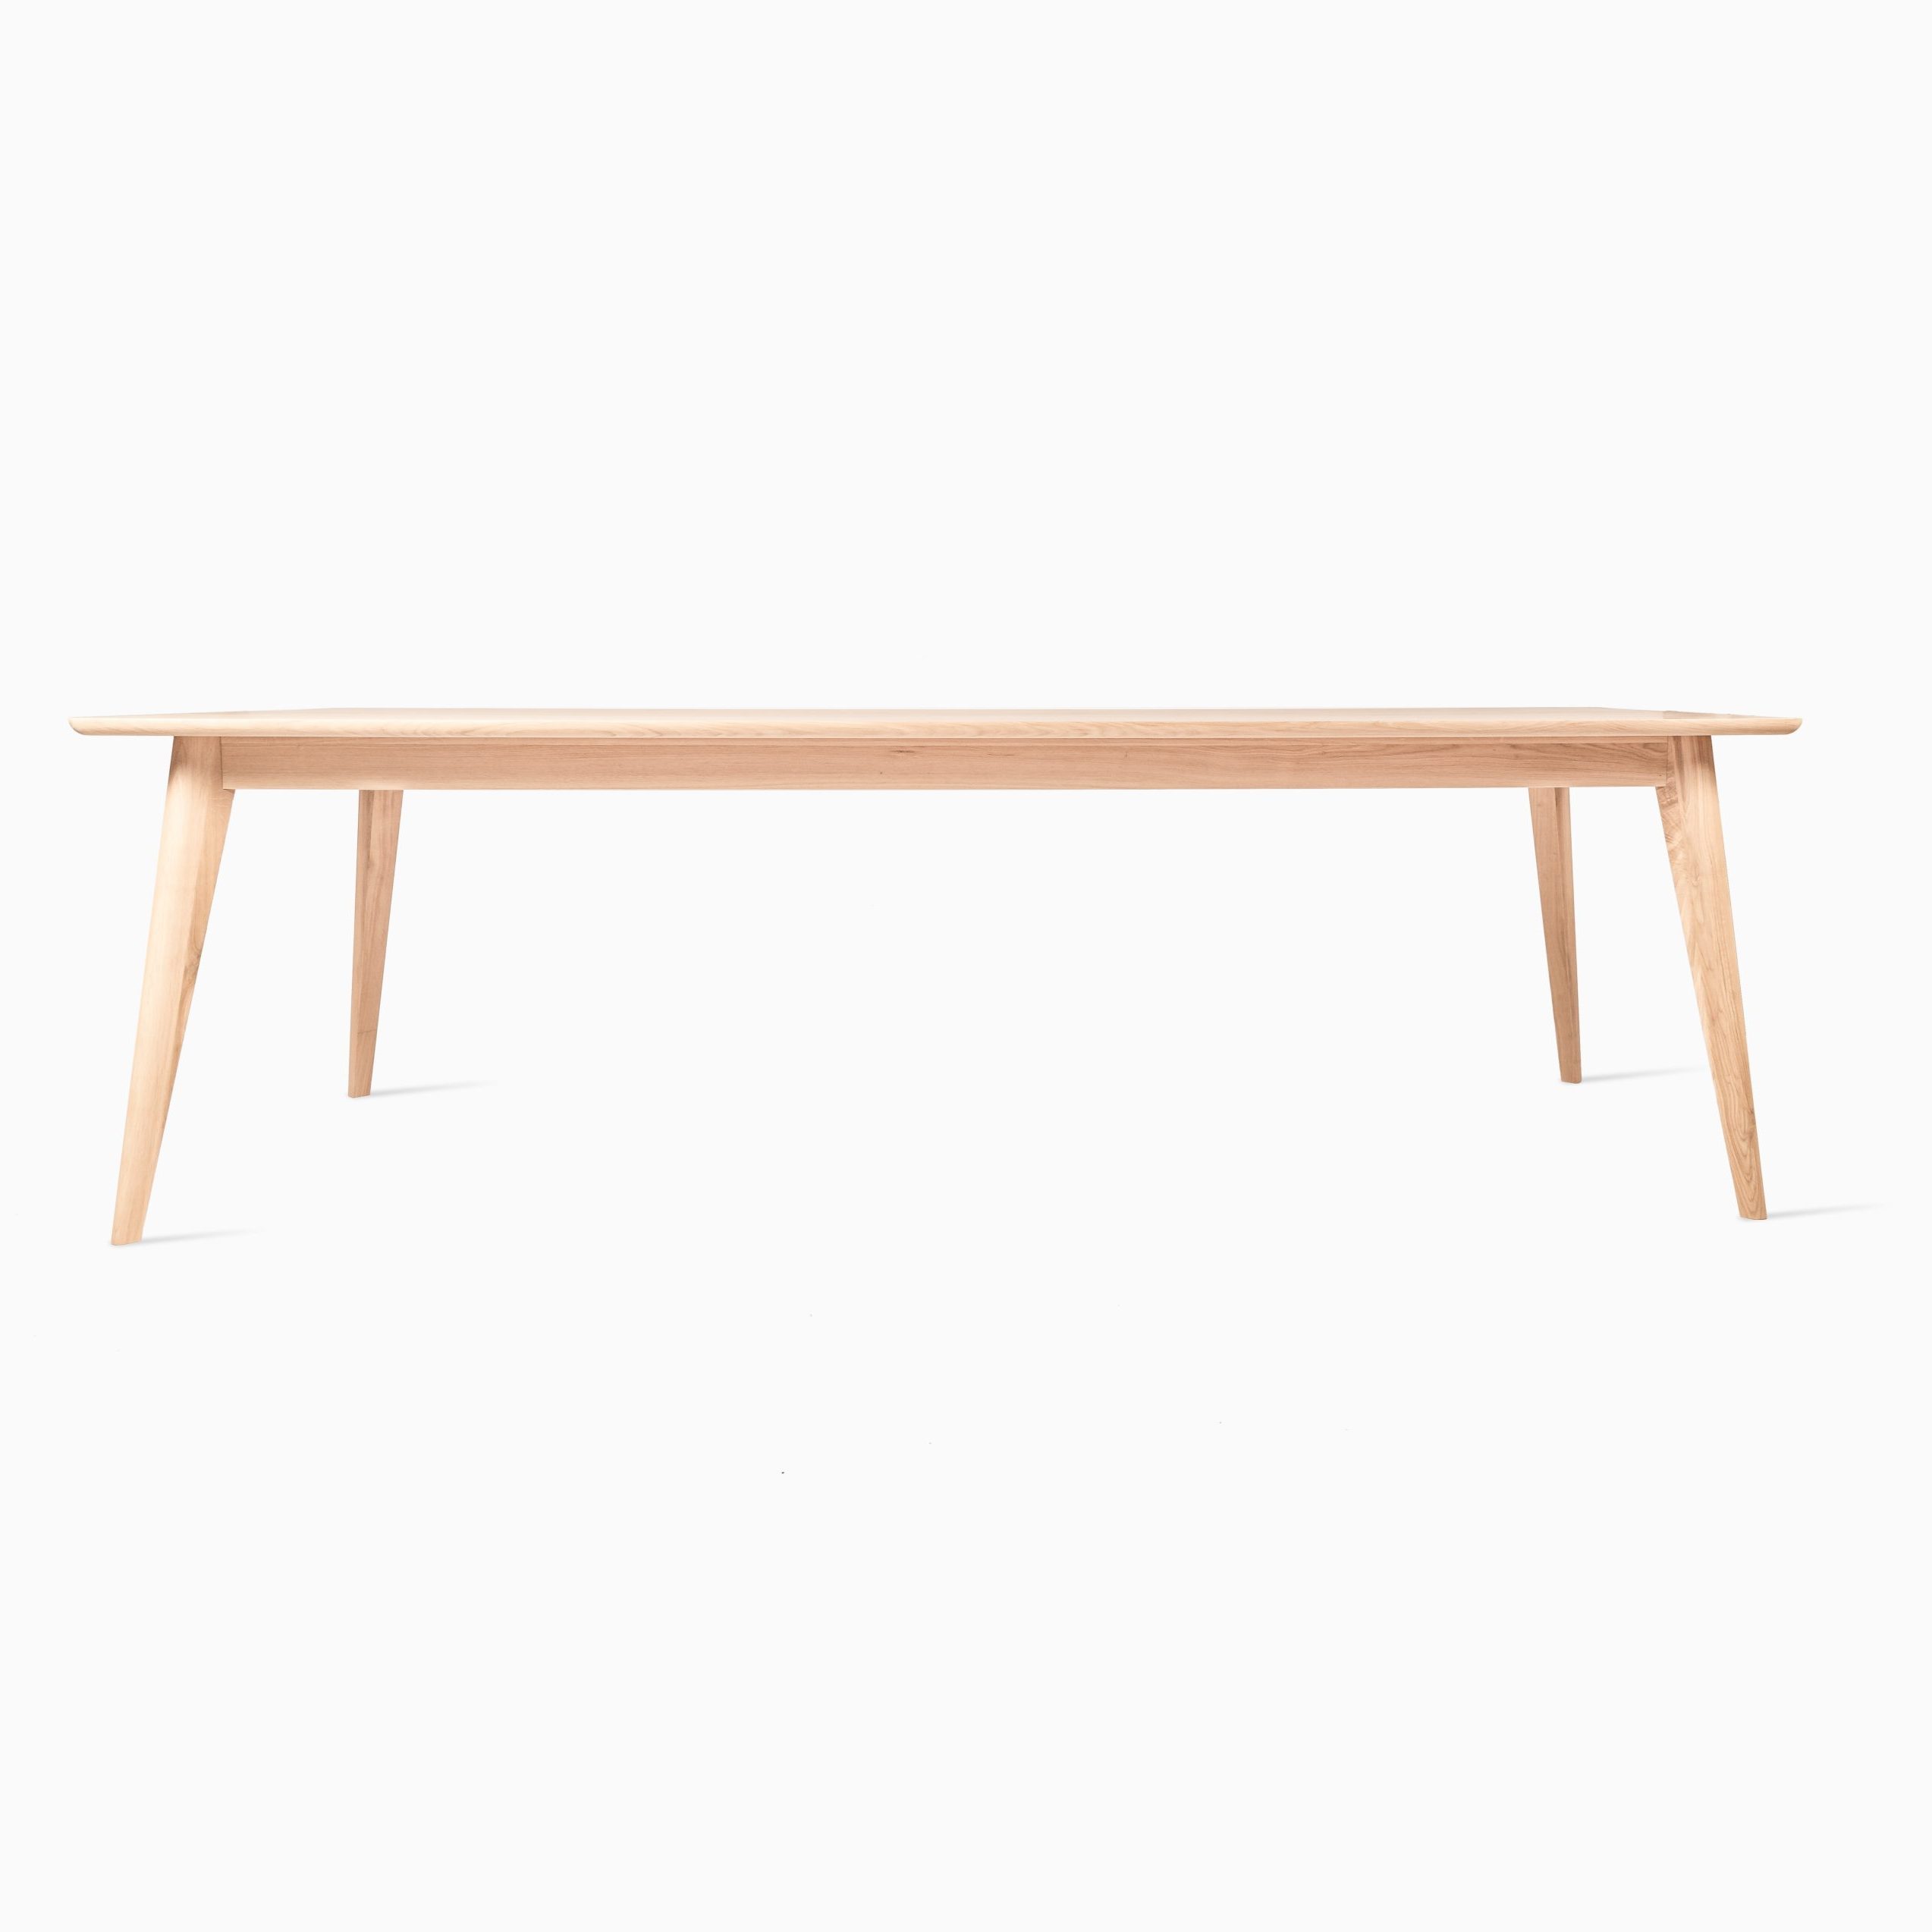 Eric Dining Table wooden dining table 2200 x 1000mm - American Oak